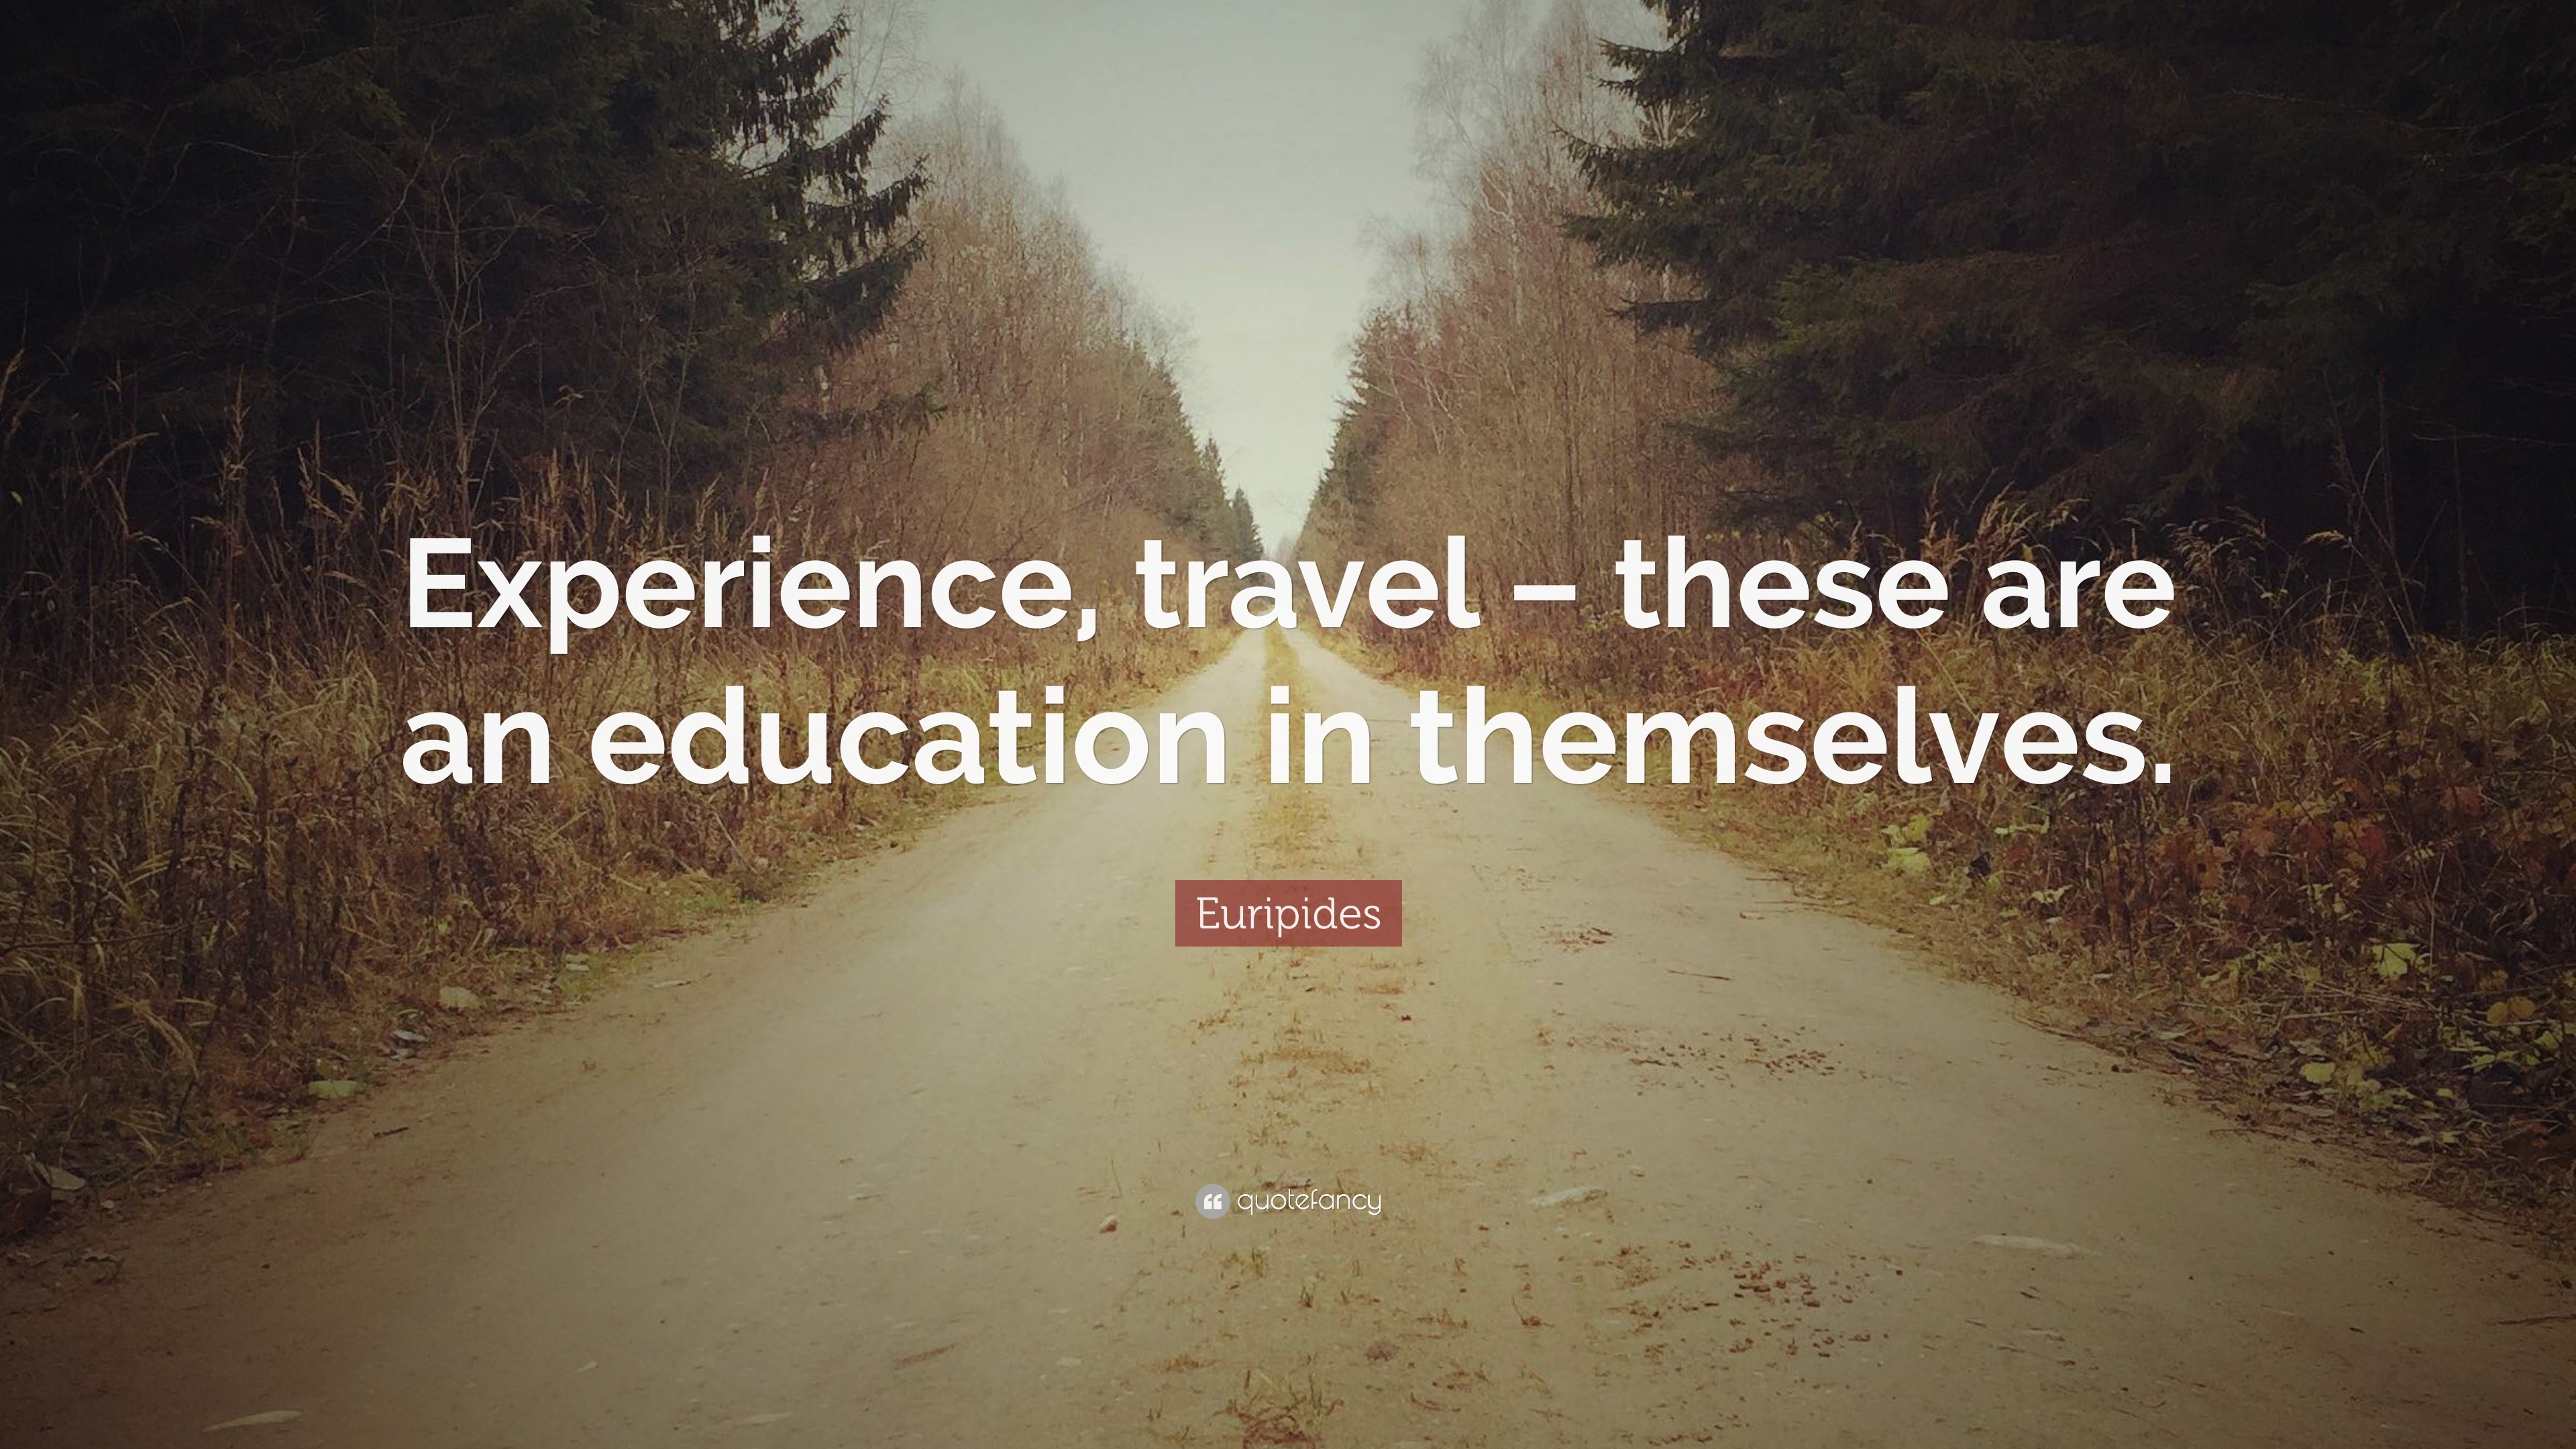 experience travel these are as education in themselves